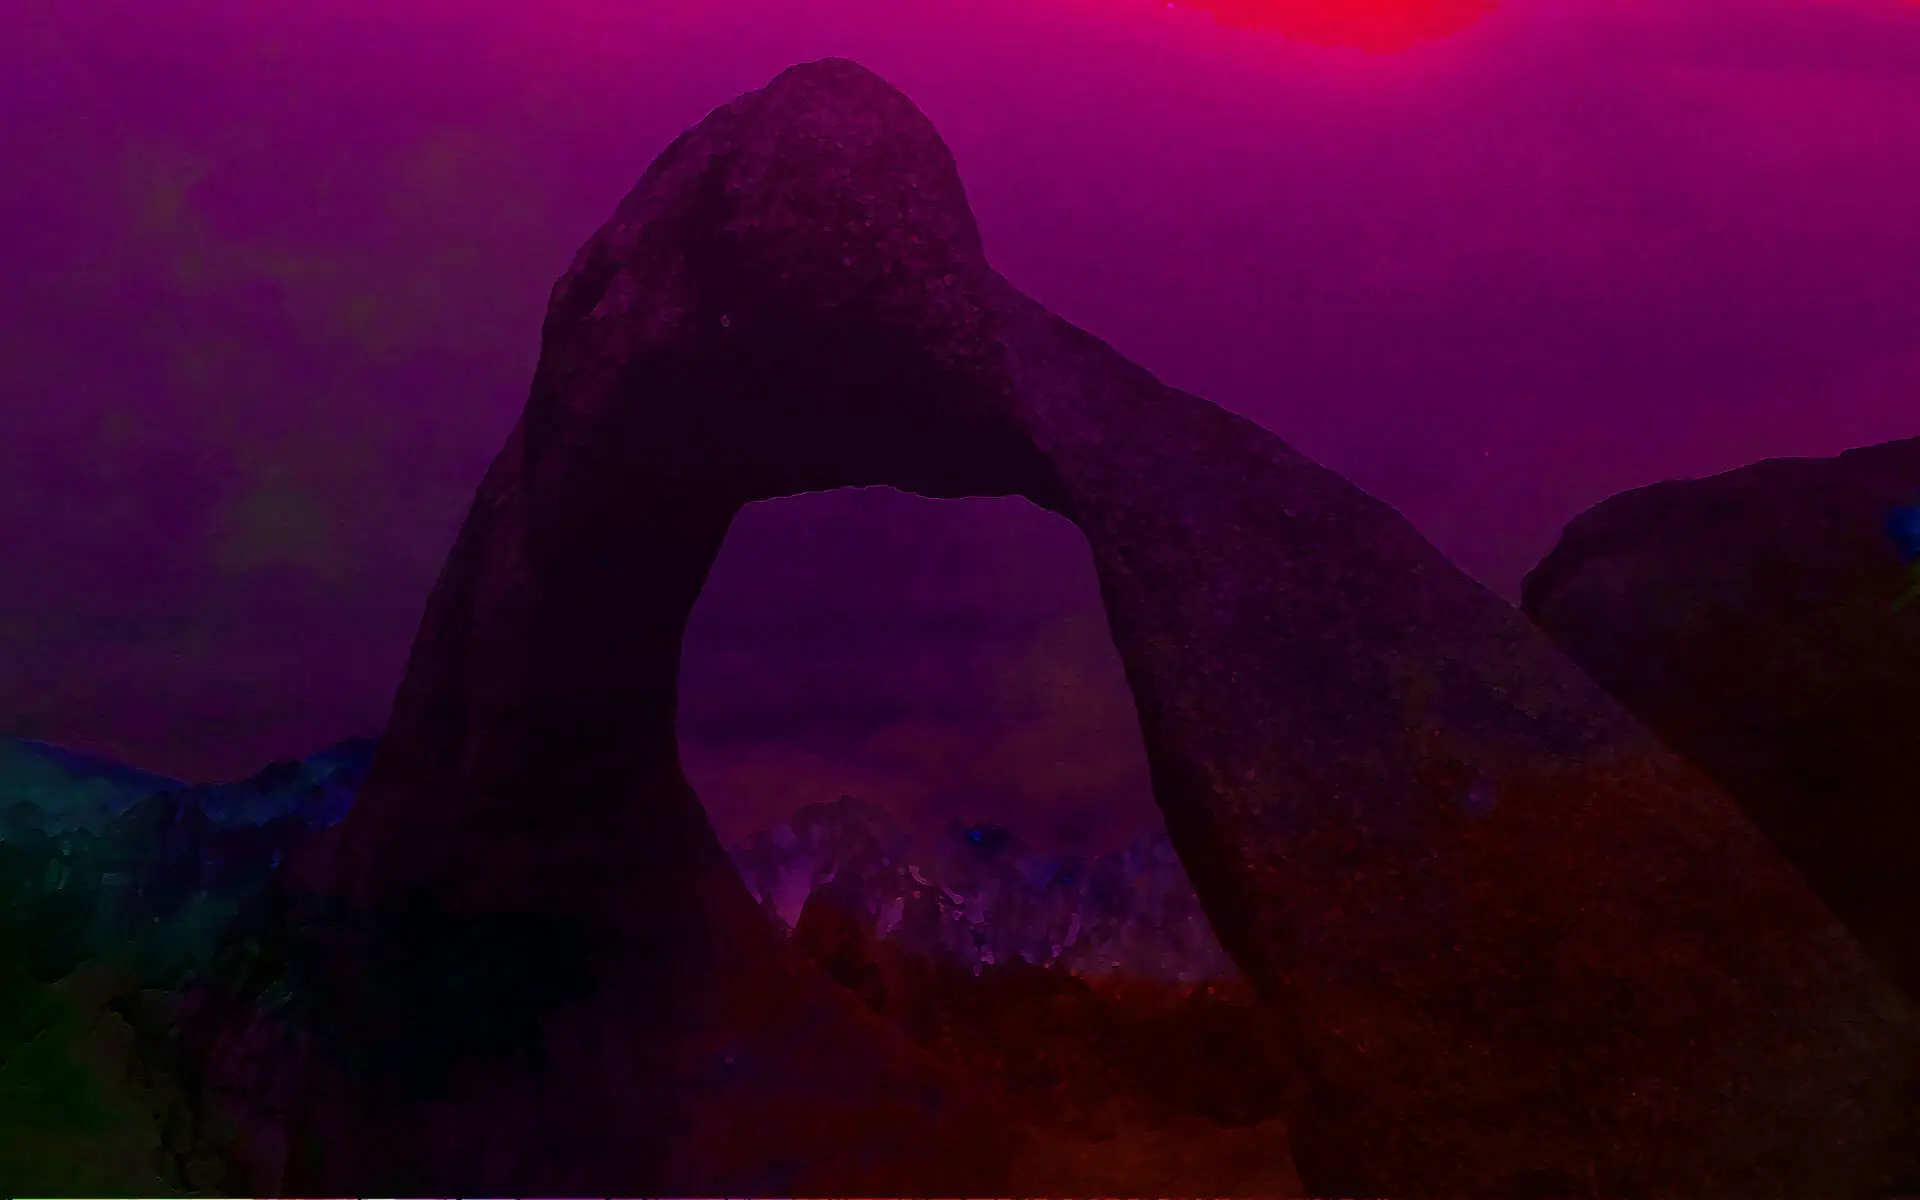 Rock arch with purple light shining through symbolizing a portal to another world